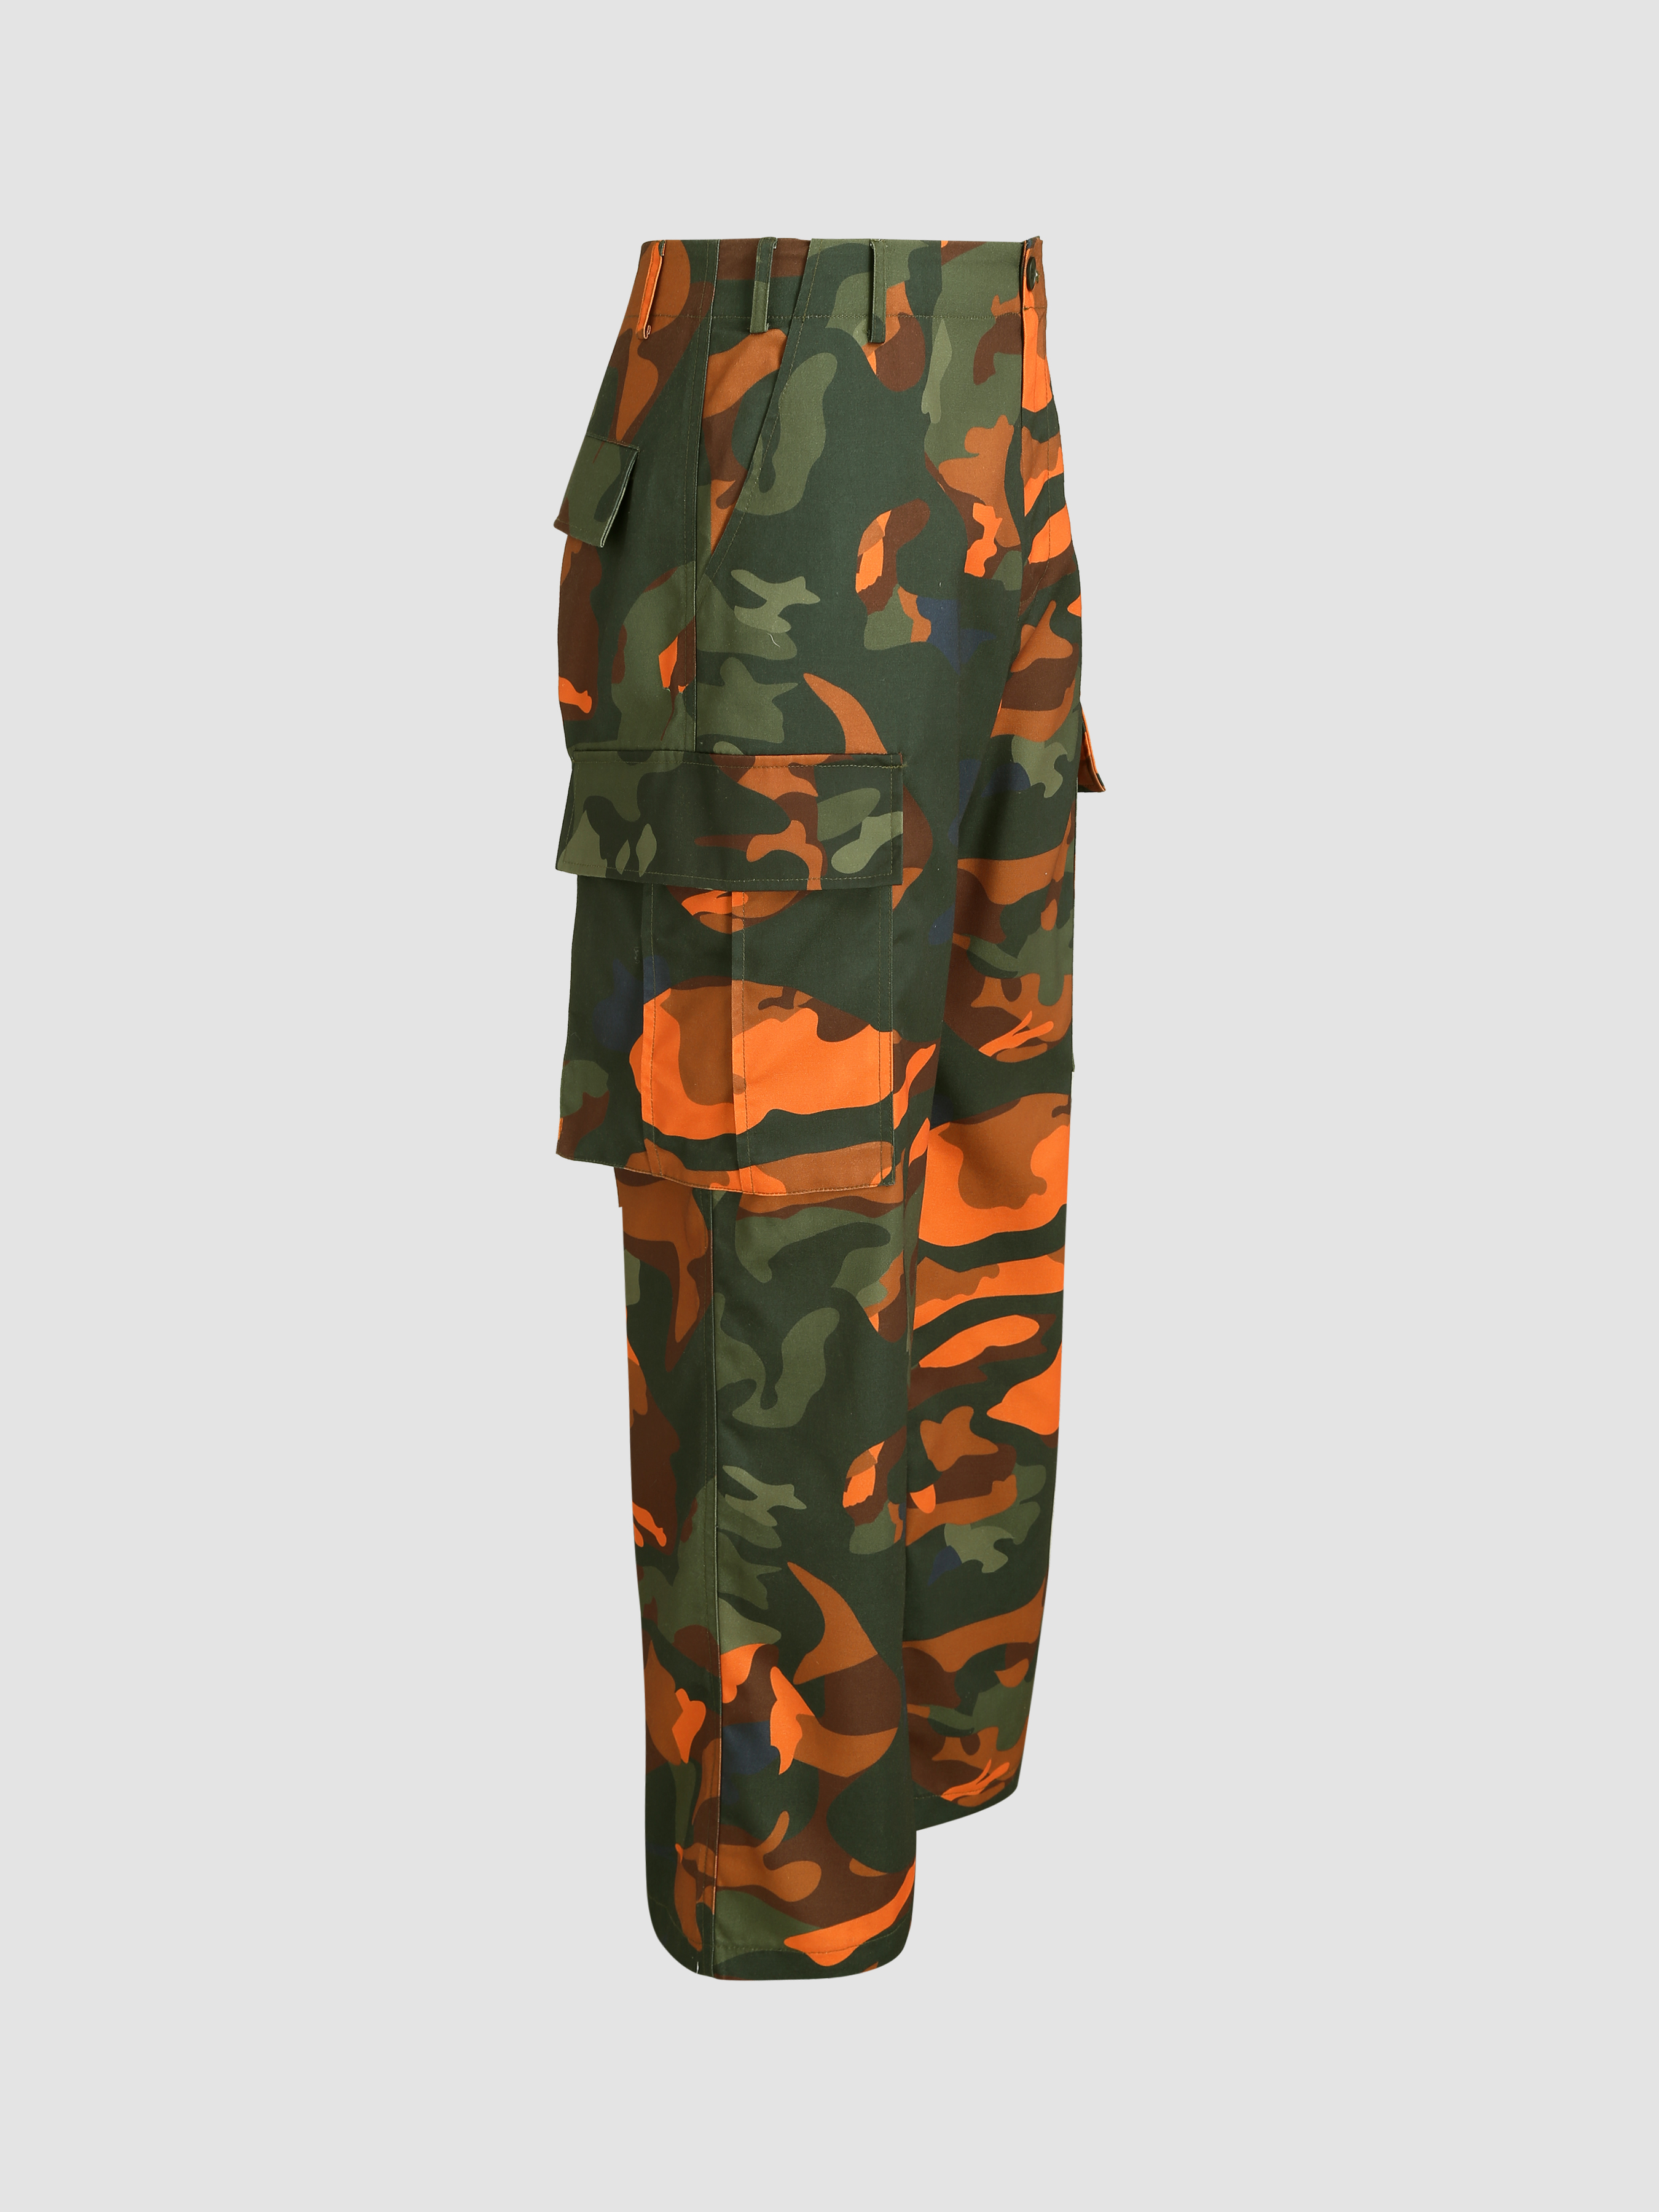 Sexy Camouflage Punk Camouflage Trousers Women For Women Loose Fit, Hip Hop  Dance Baggy Pants In Pink, Orange, Purple, And Pink 201106 From Mu03,  $15.13 | DHgate.Com